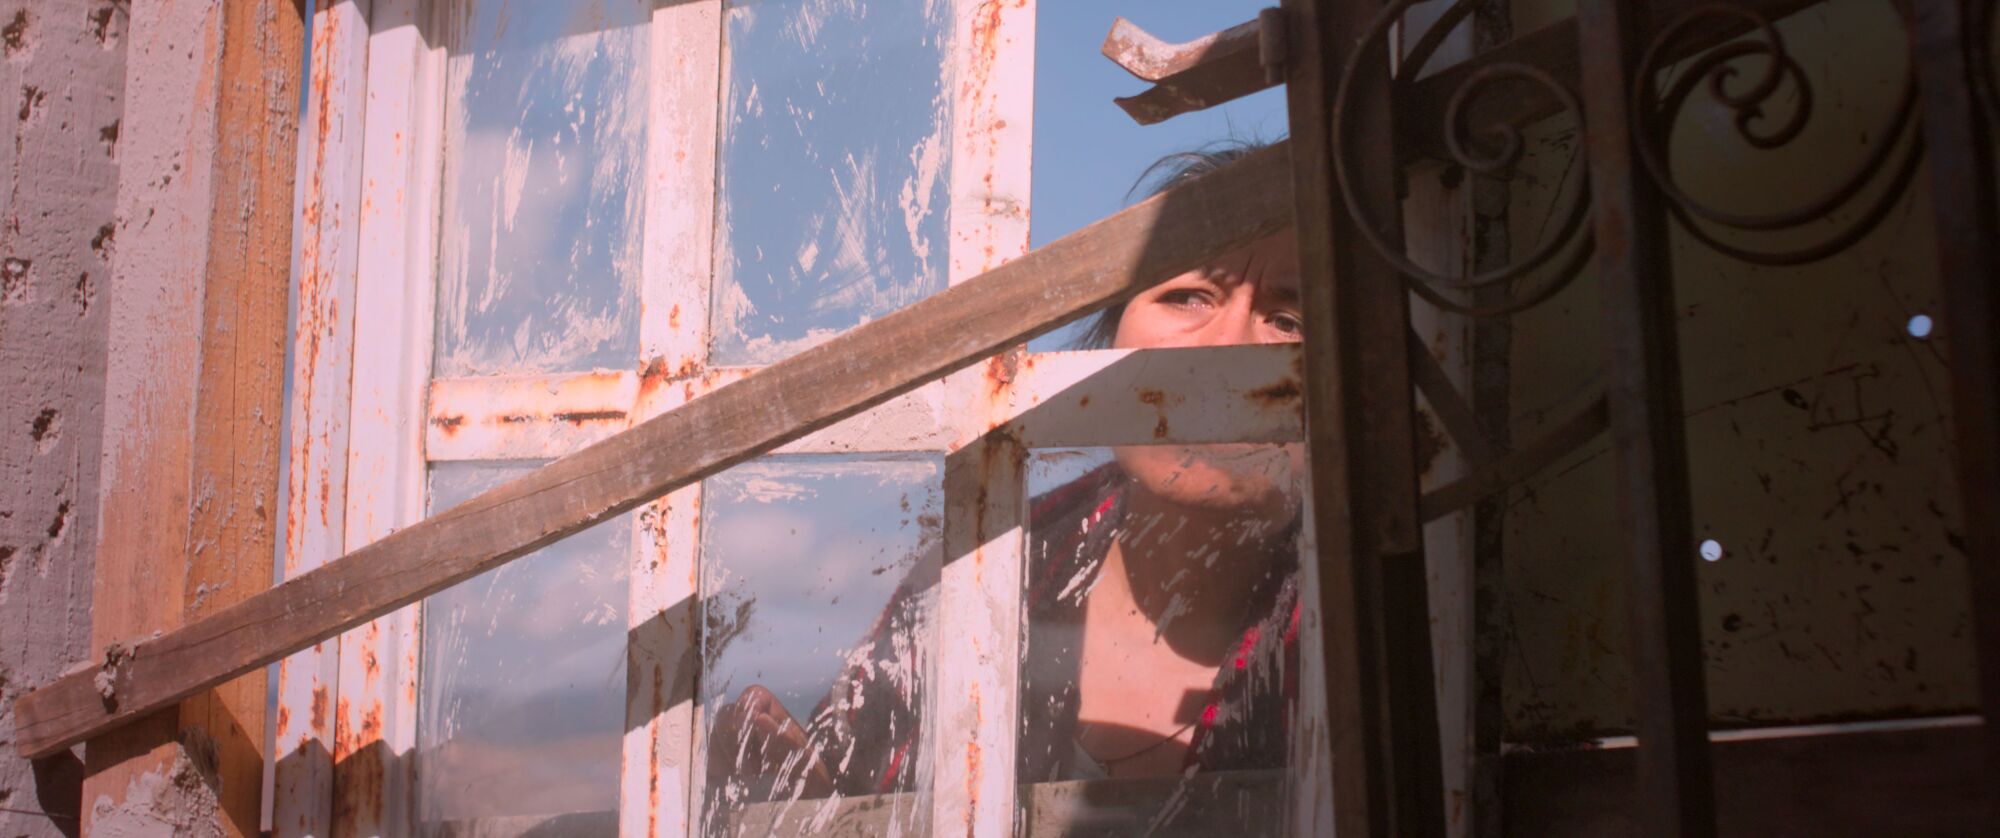 Mercedes Hernandez peers through a window in a scene from "Identifying Features."